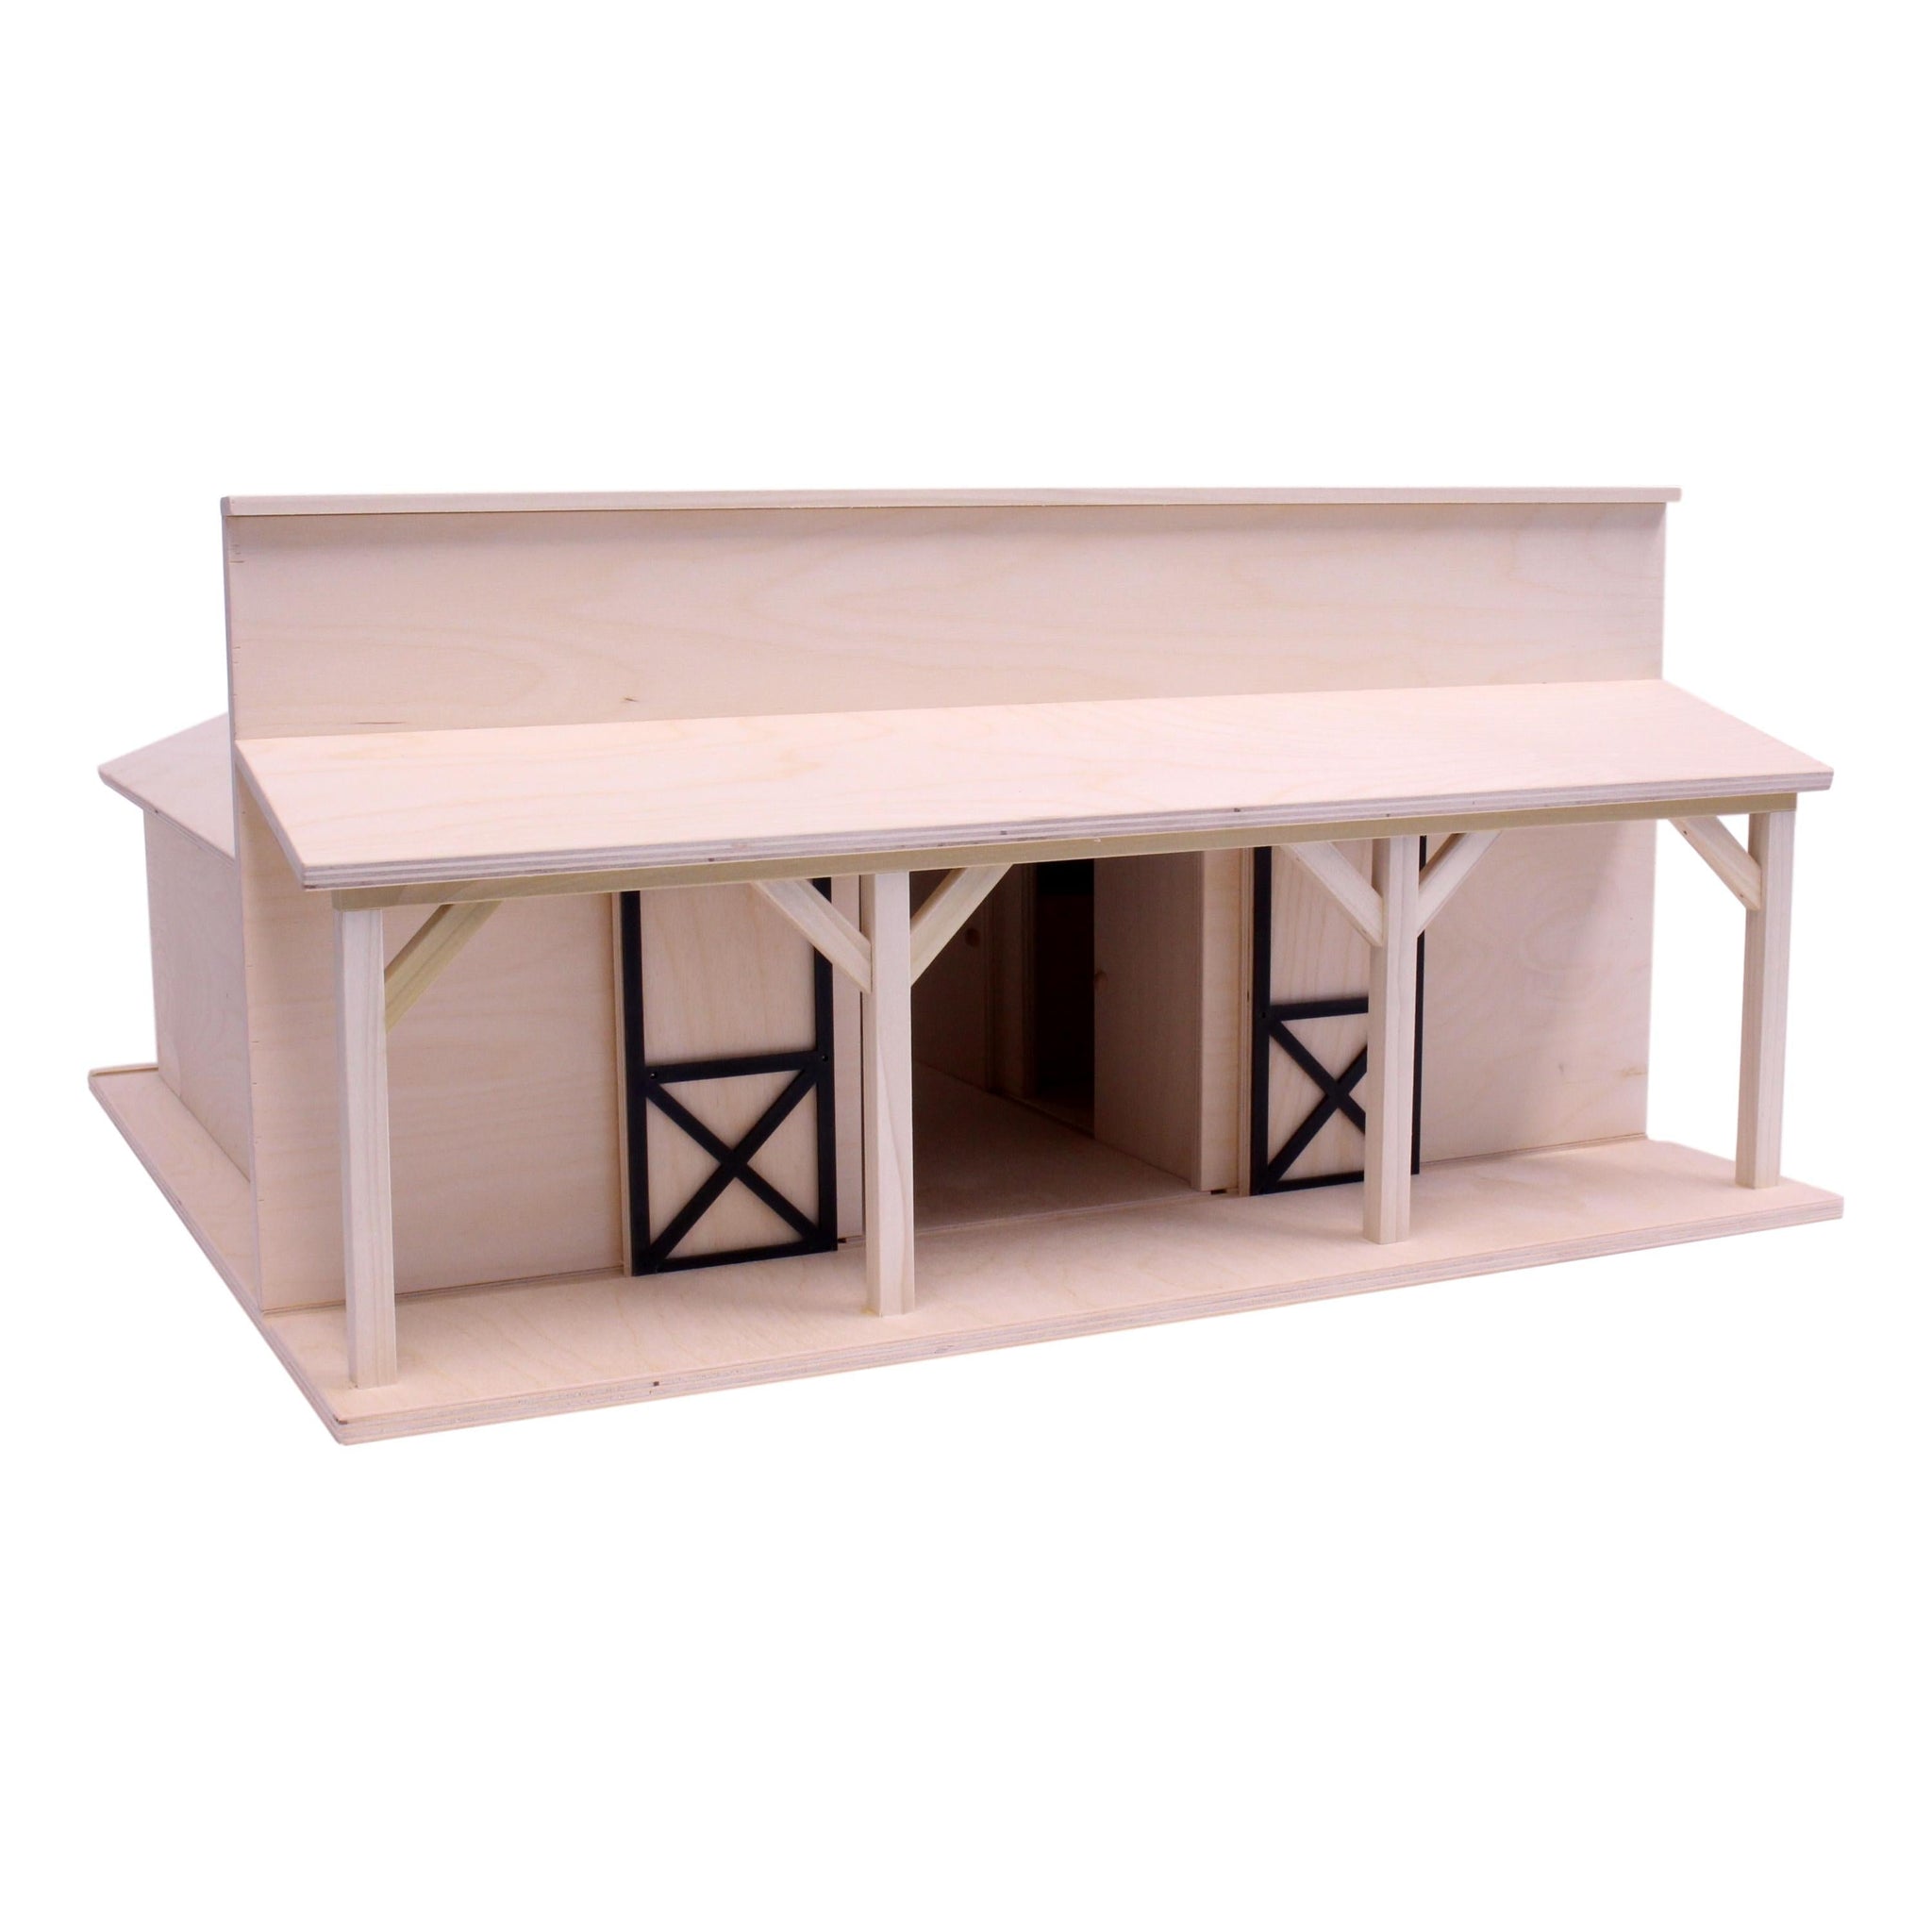 Large Wooden Western Horse Barn Toy